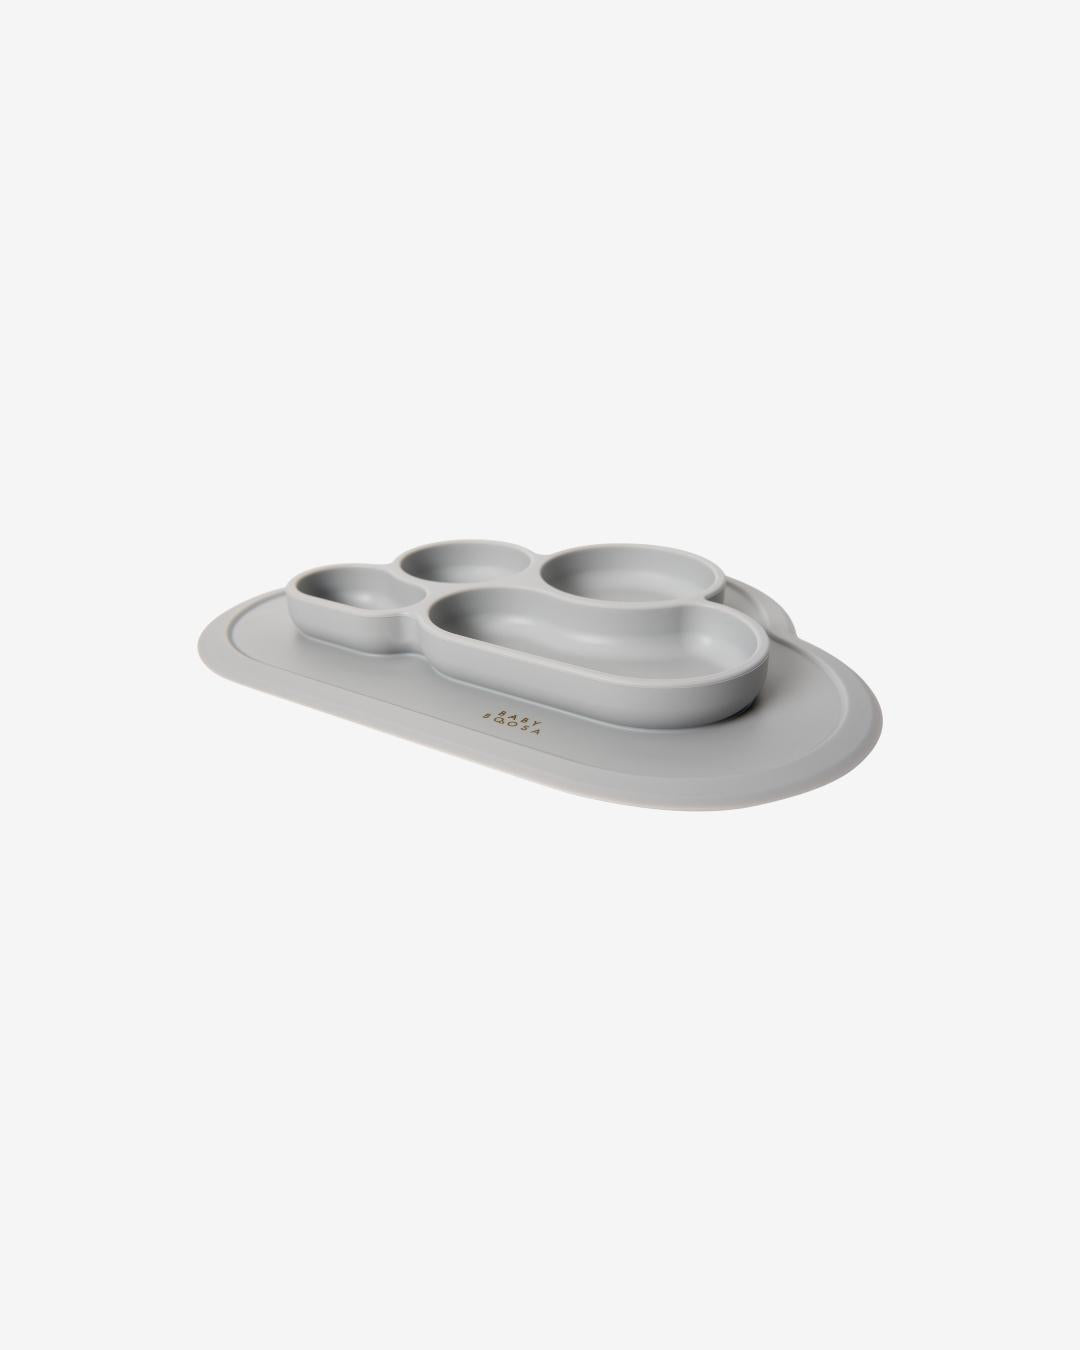 Weaning Cloud Plate Mat | Grippy Suction | Non-slip | Catch-food | Side scoops | Easy clean (Concrete Grey)